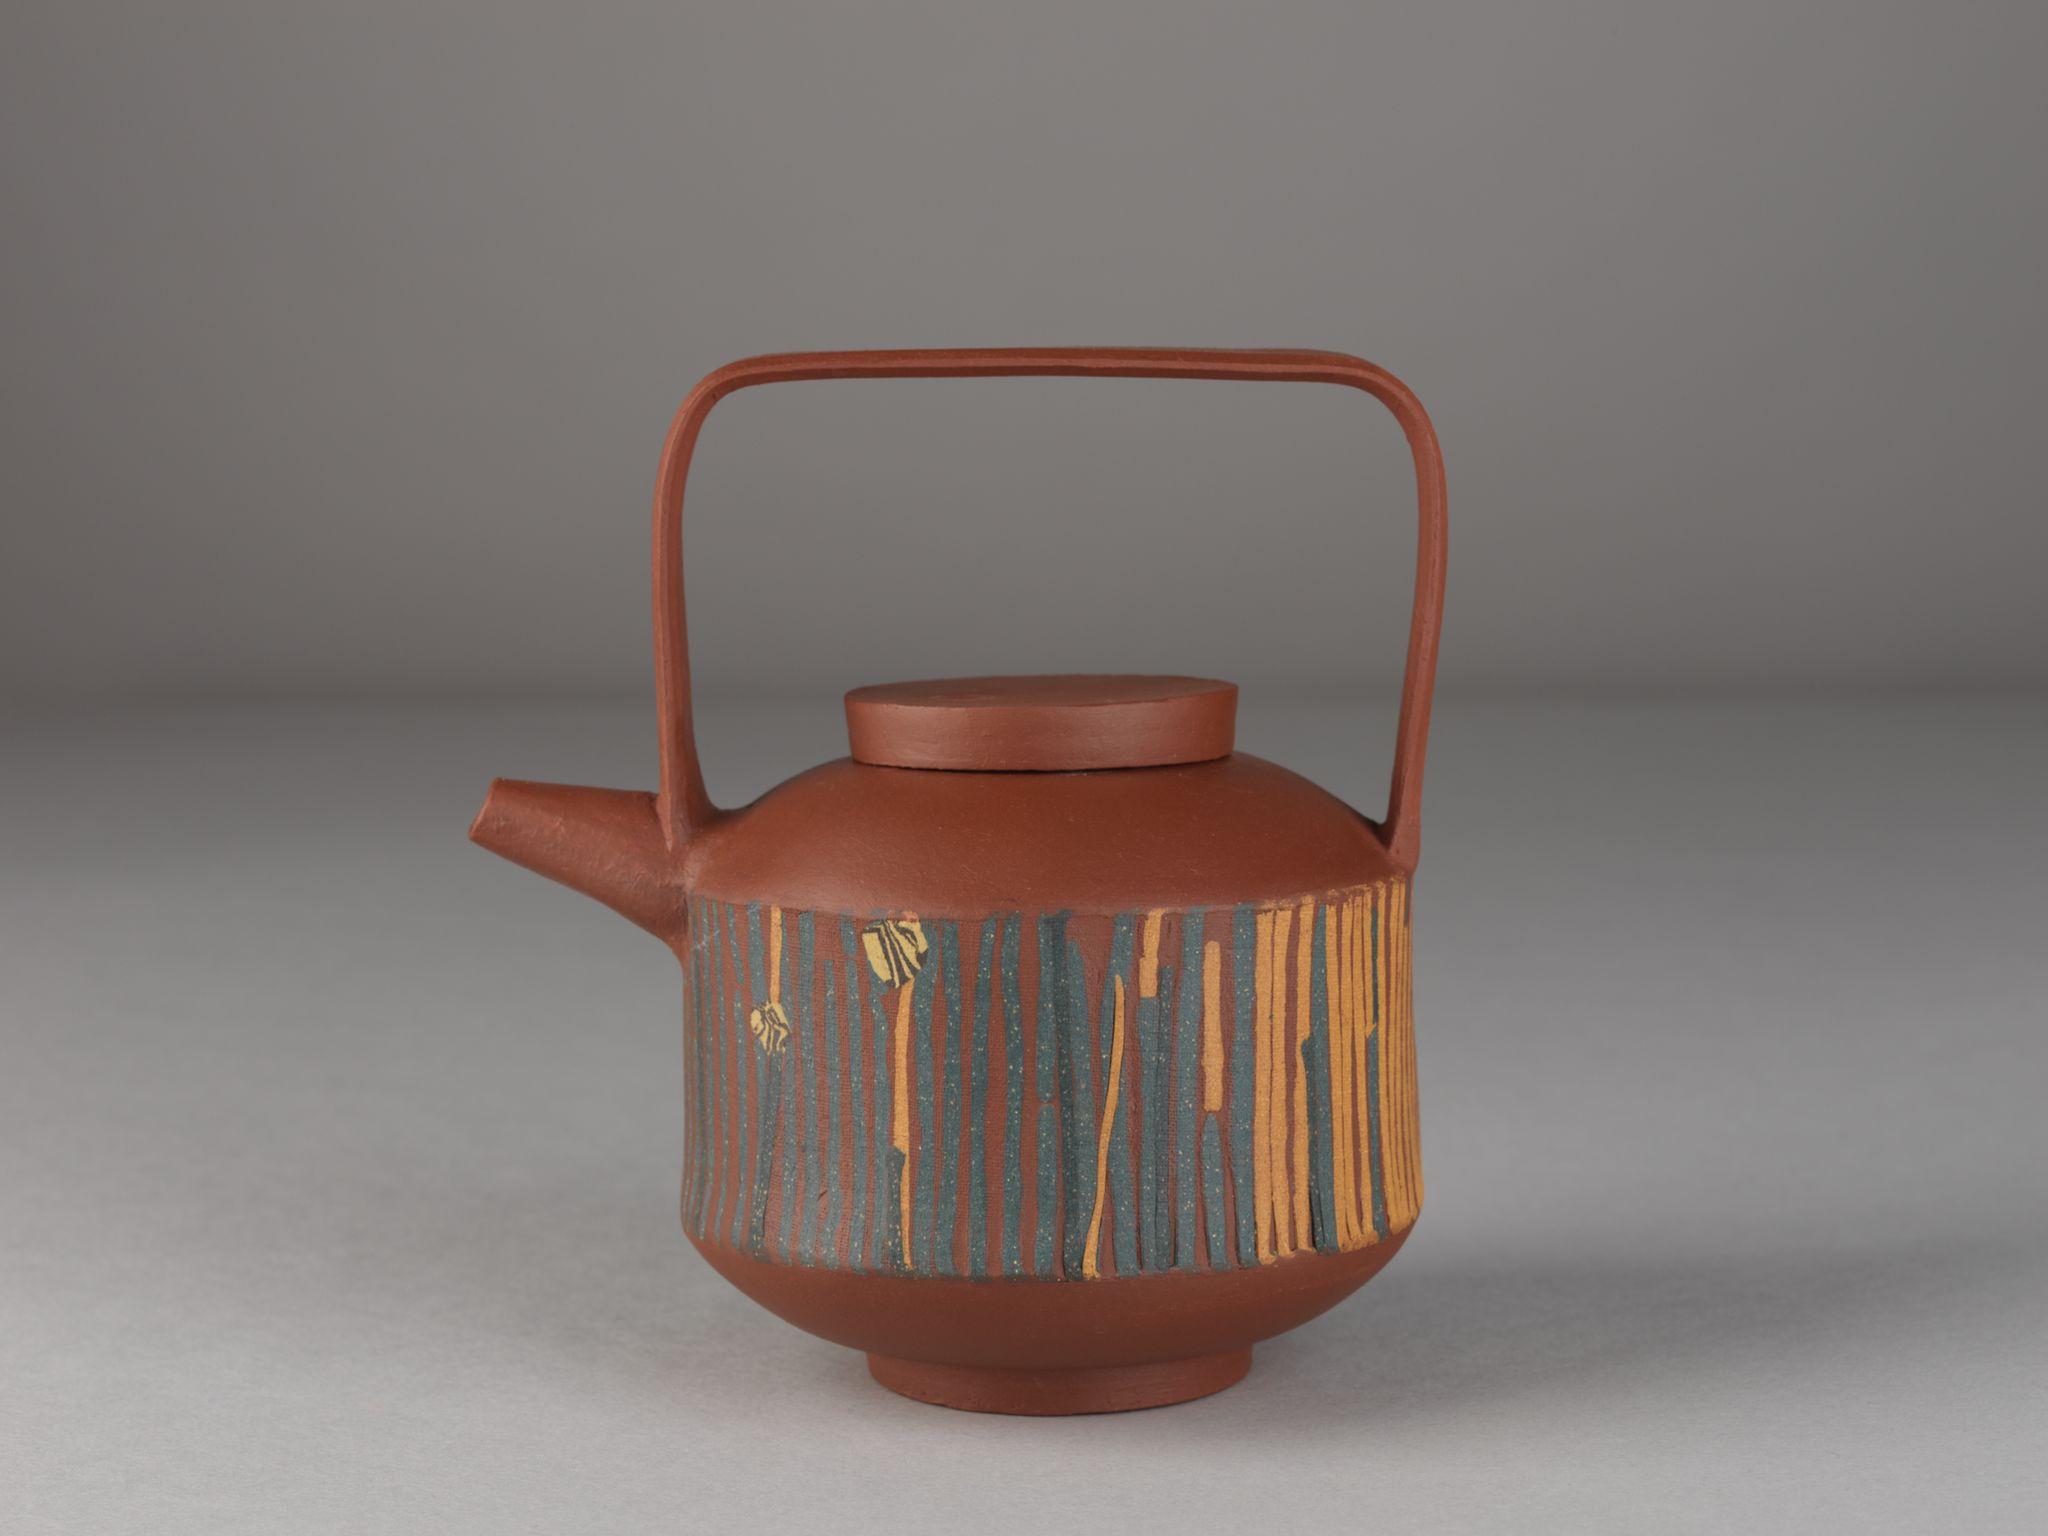 The "2021 Tea Ware by Hong Kong Potters" exhibition is being held at the Flagstaff House Museum of Tea Ware. Picture shows the Second Prize winner in the Open Category, Fion Yuen's "Laminated Colour Clay". 